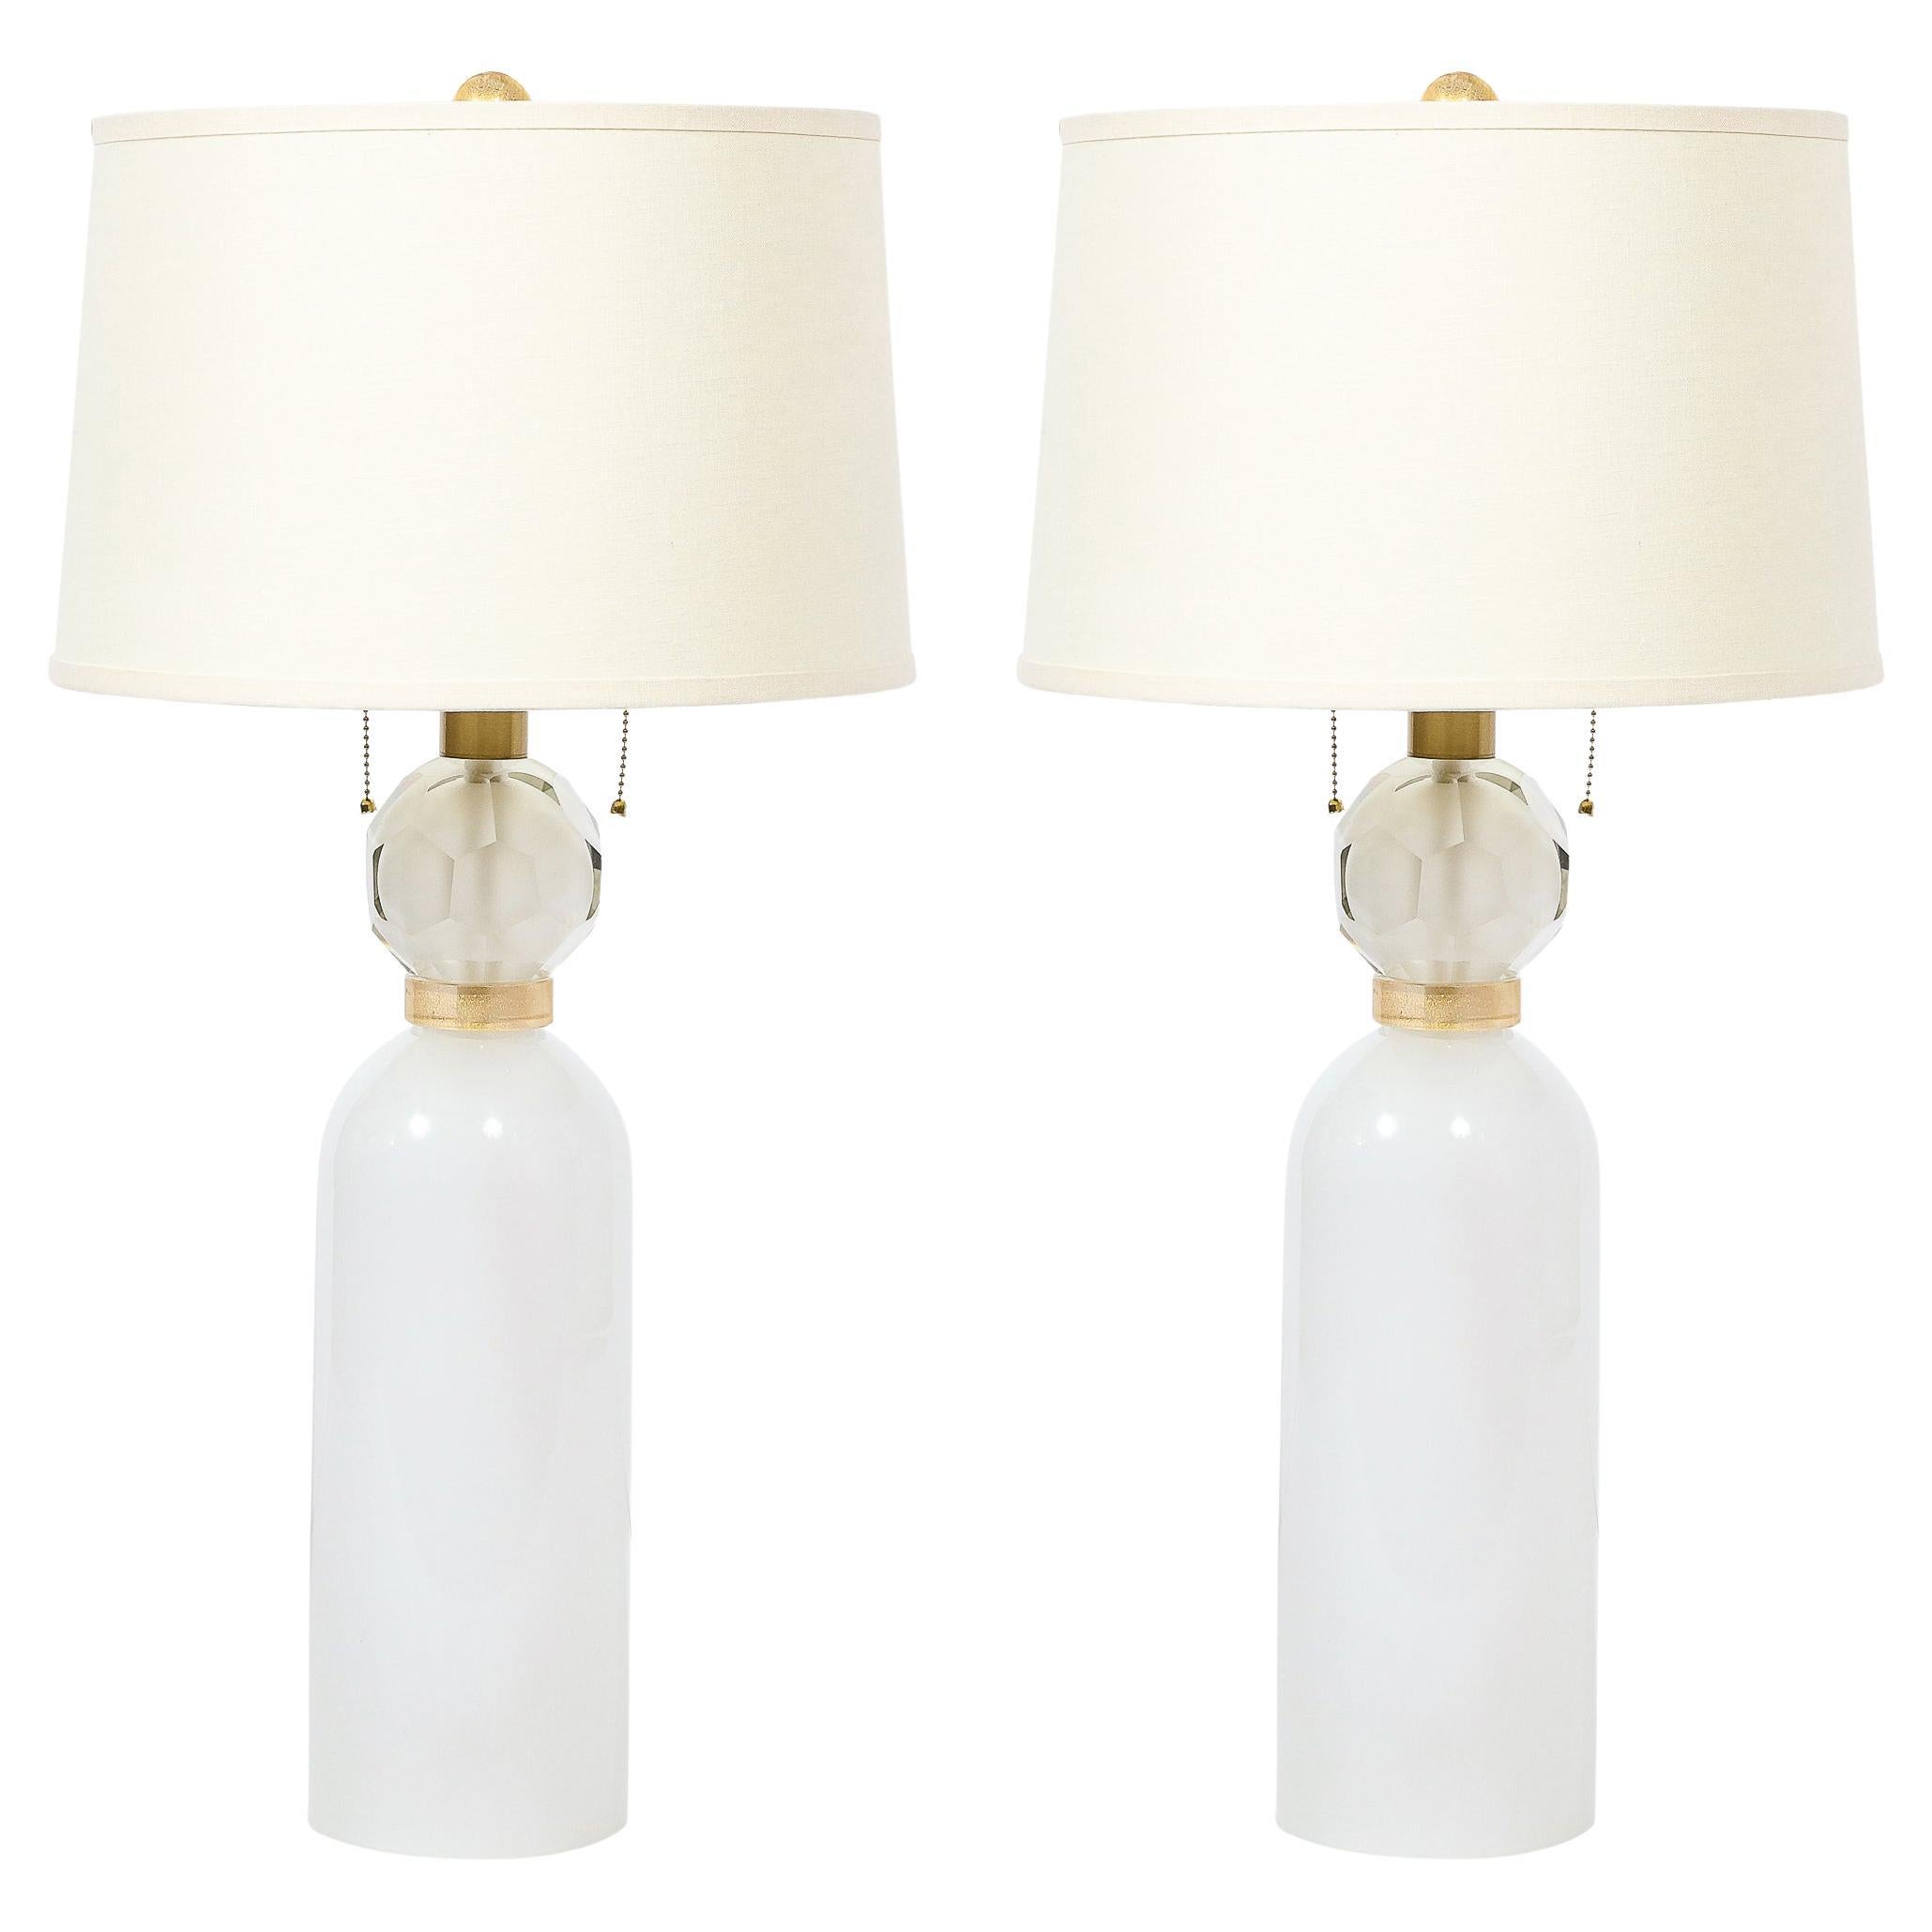 Pair of Hand-Blown White Murano Glass Lamps with 24K Gold Banded Detailing For Sale